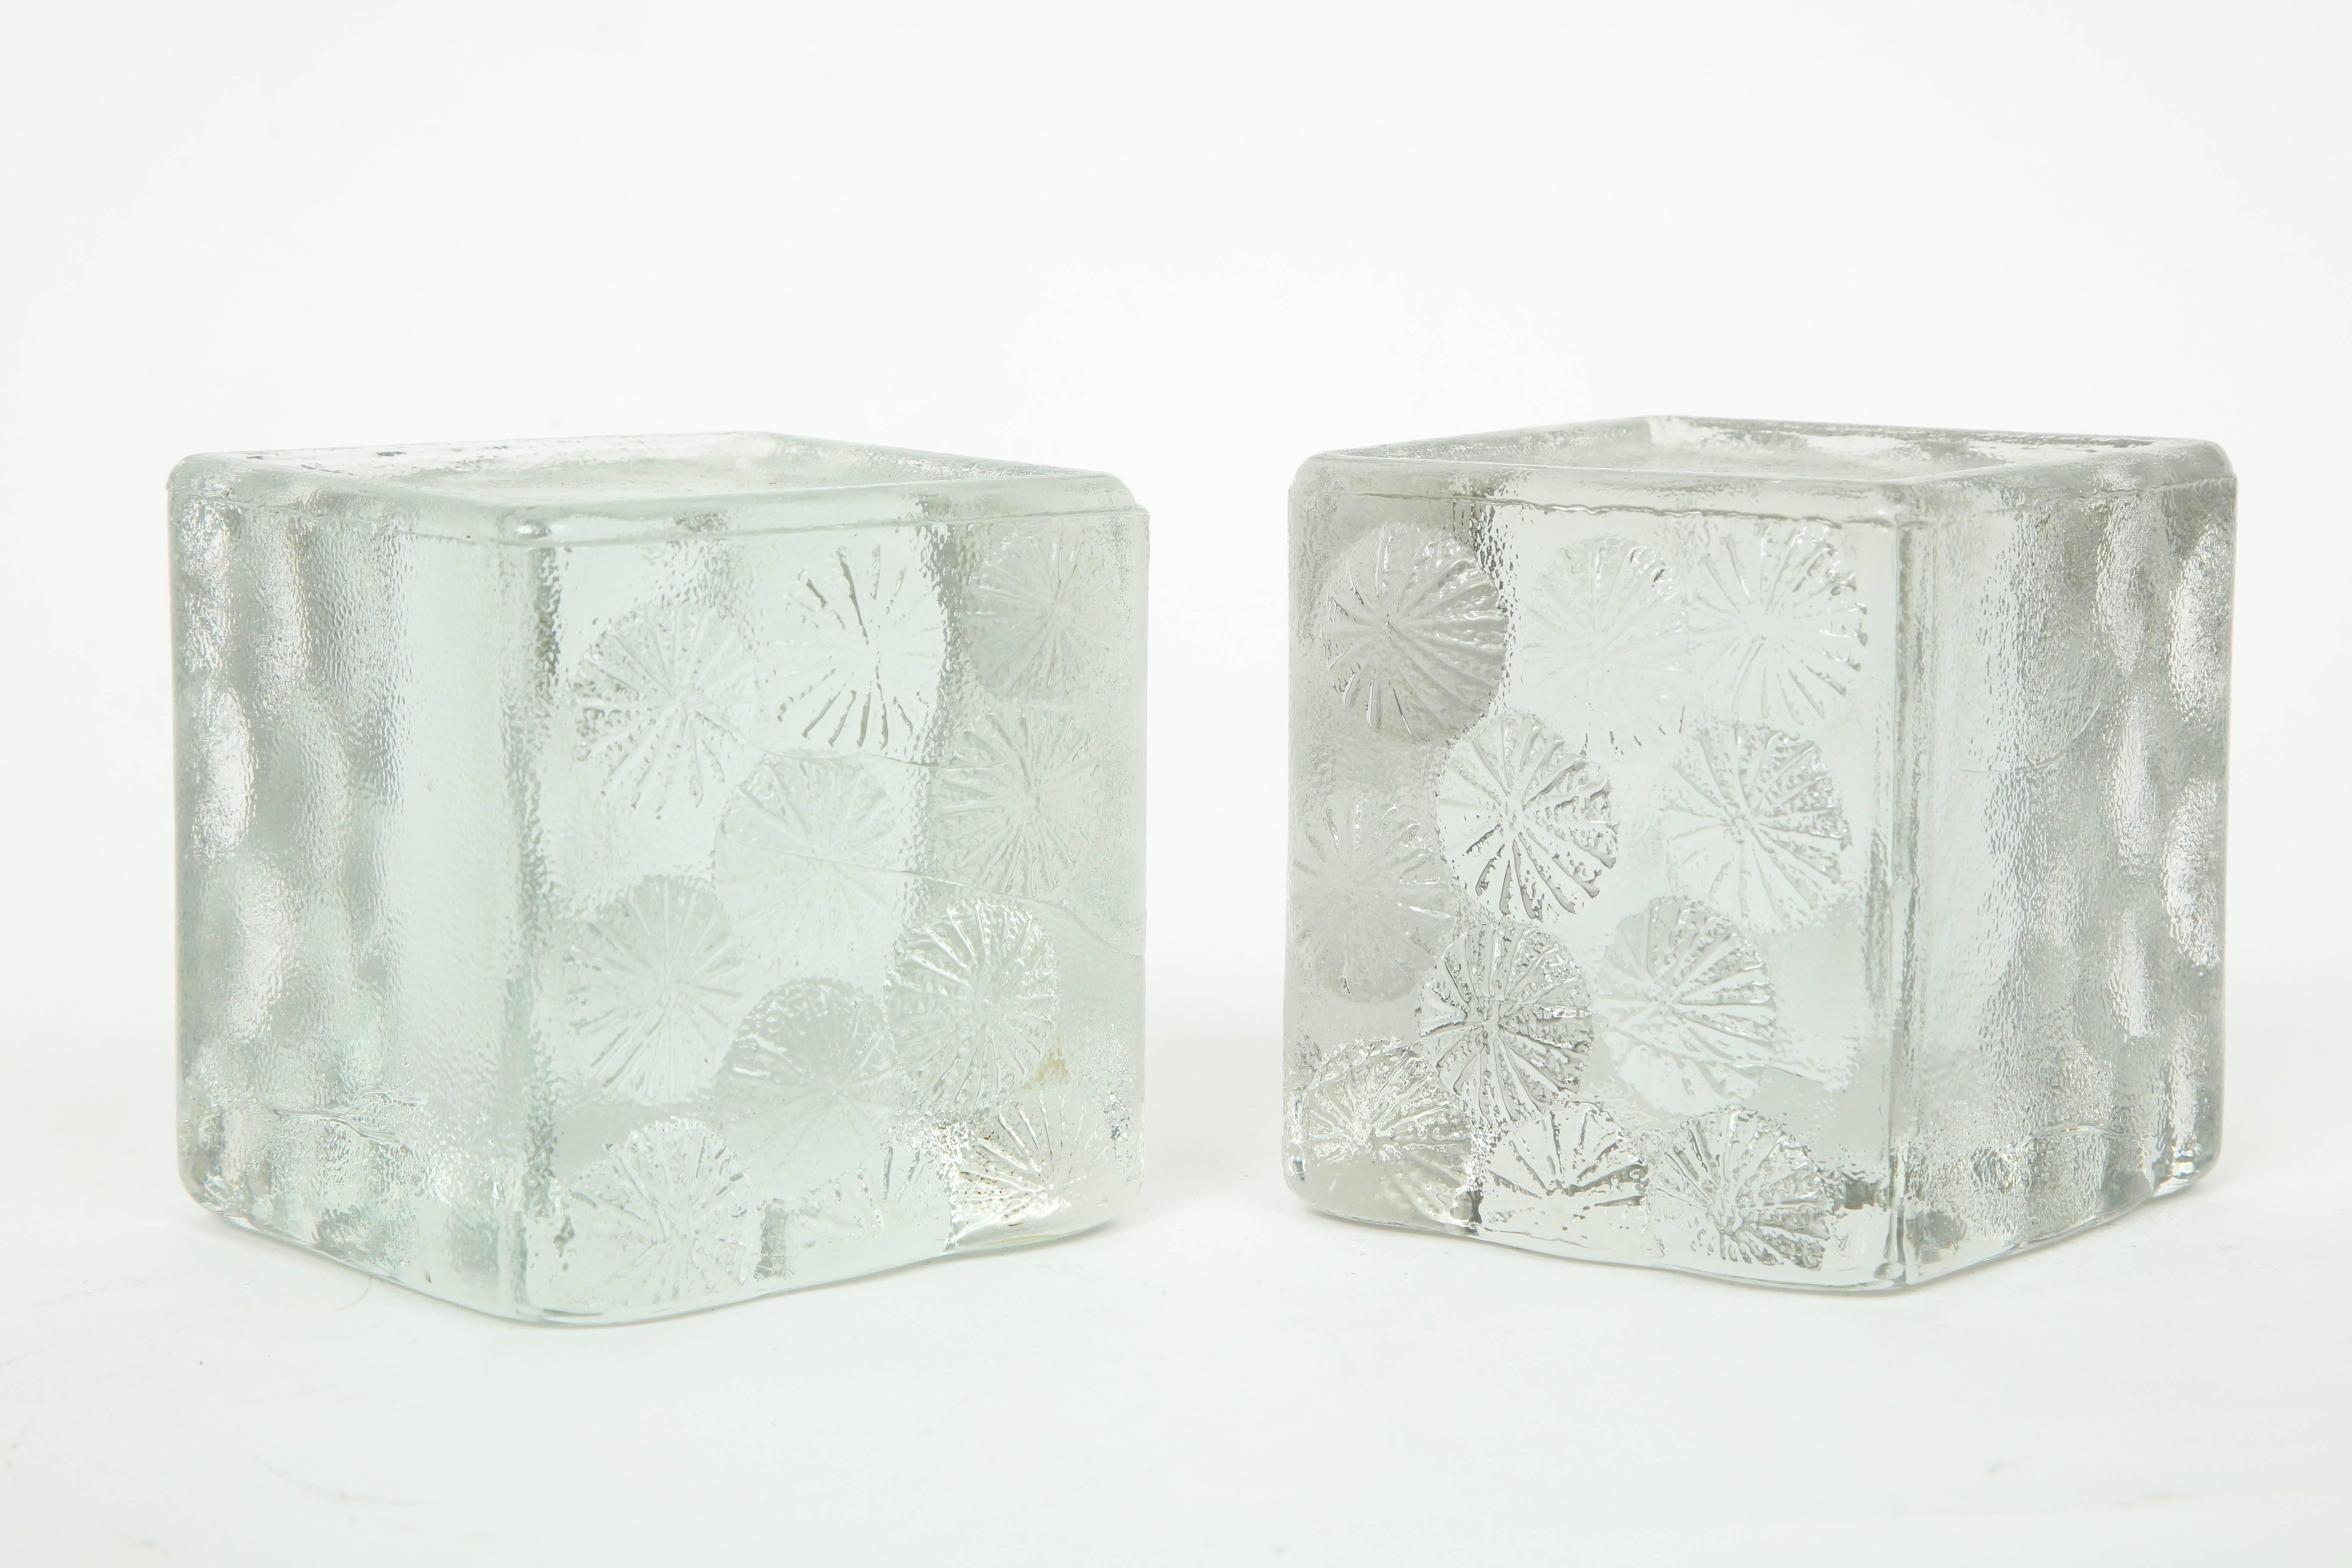 Pair of midcentury solid glass block bookends with rows of raised stylized flowers. Great in a bookcase or a coffee table as sculptural elements.